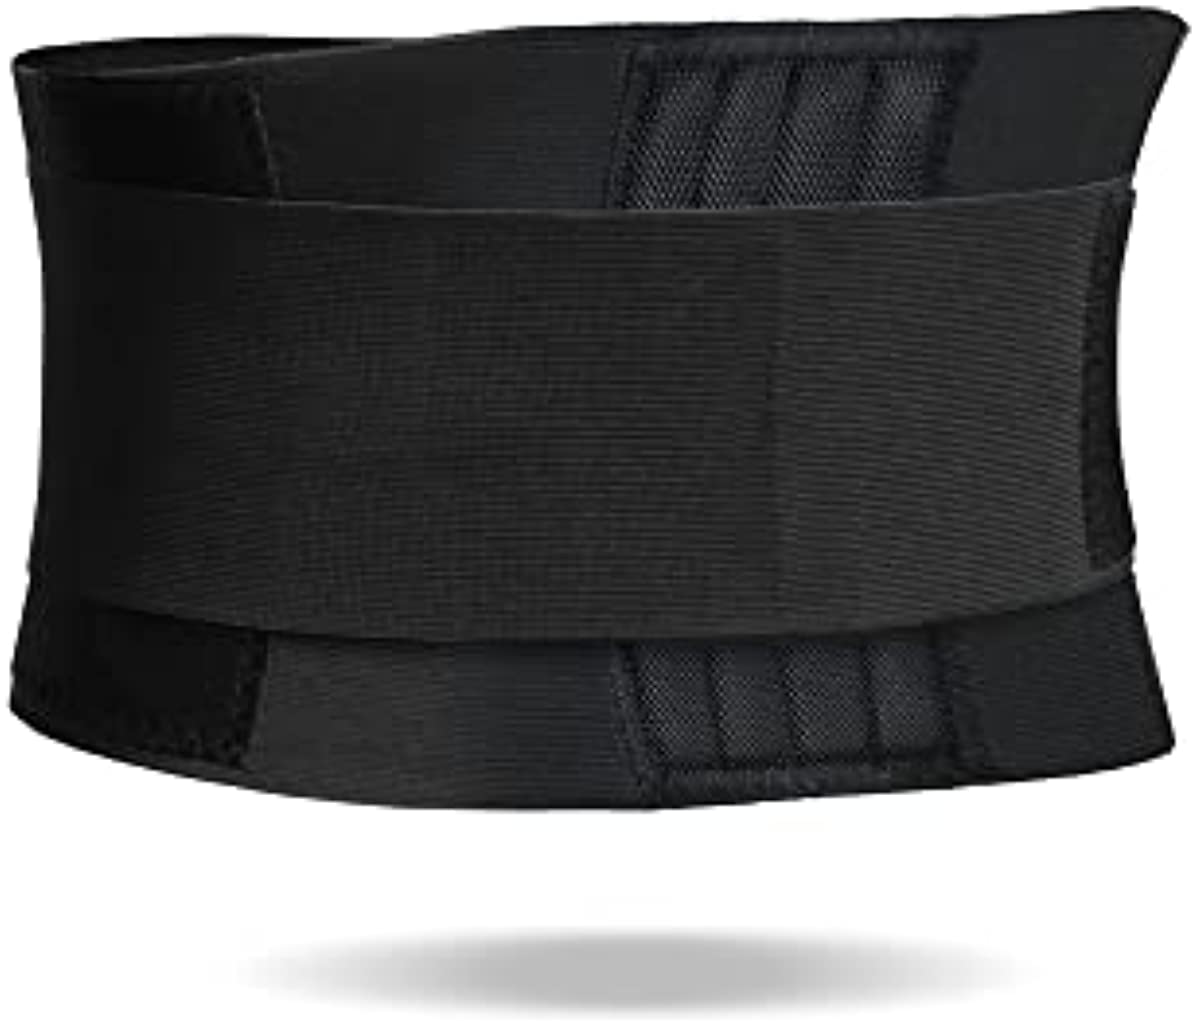 Bracoo BS33 Low Back Brace, Abdominal Support Belt for Sprains, Strains, Pain Relief & Posture Correction - Breathable & Ultra-Lightweight Stabilizers